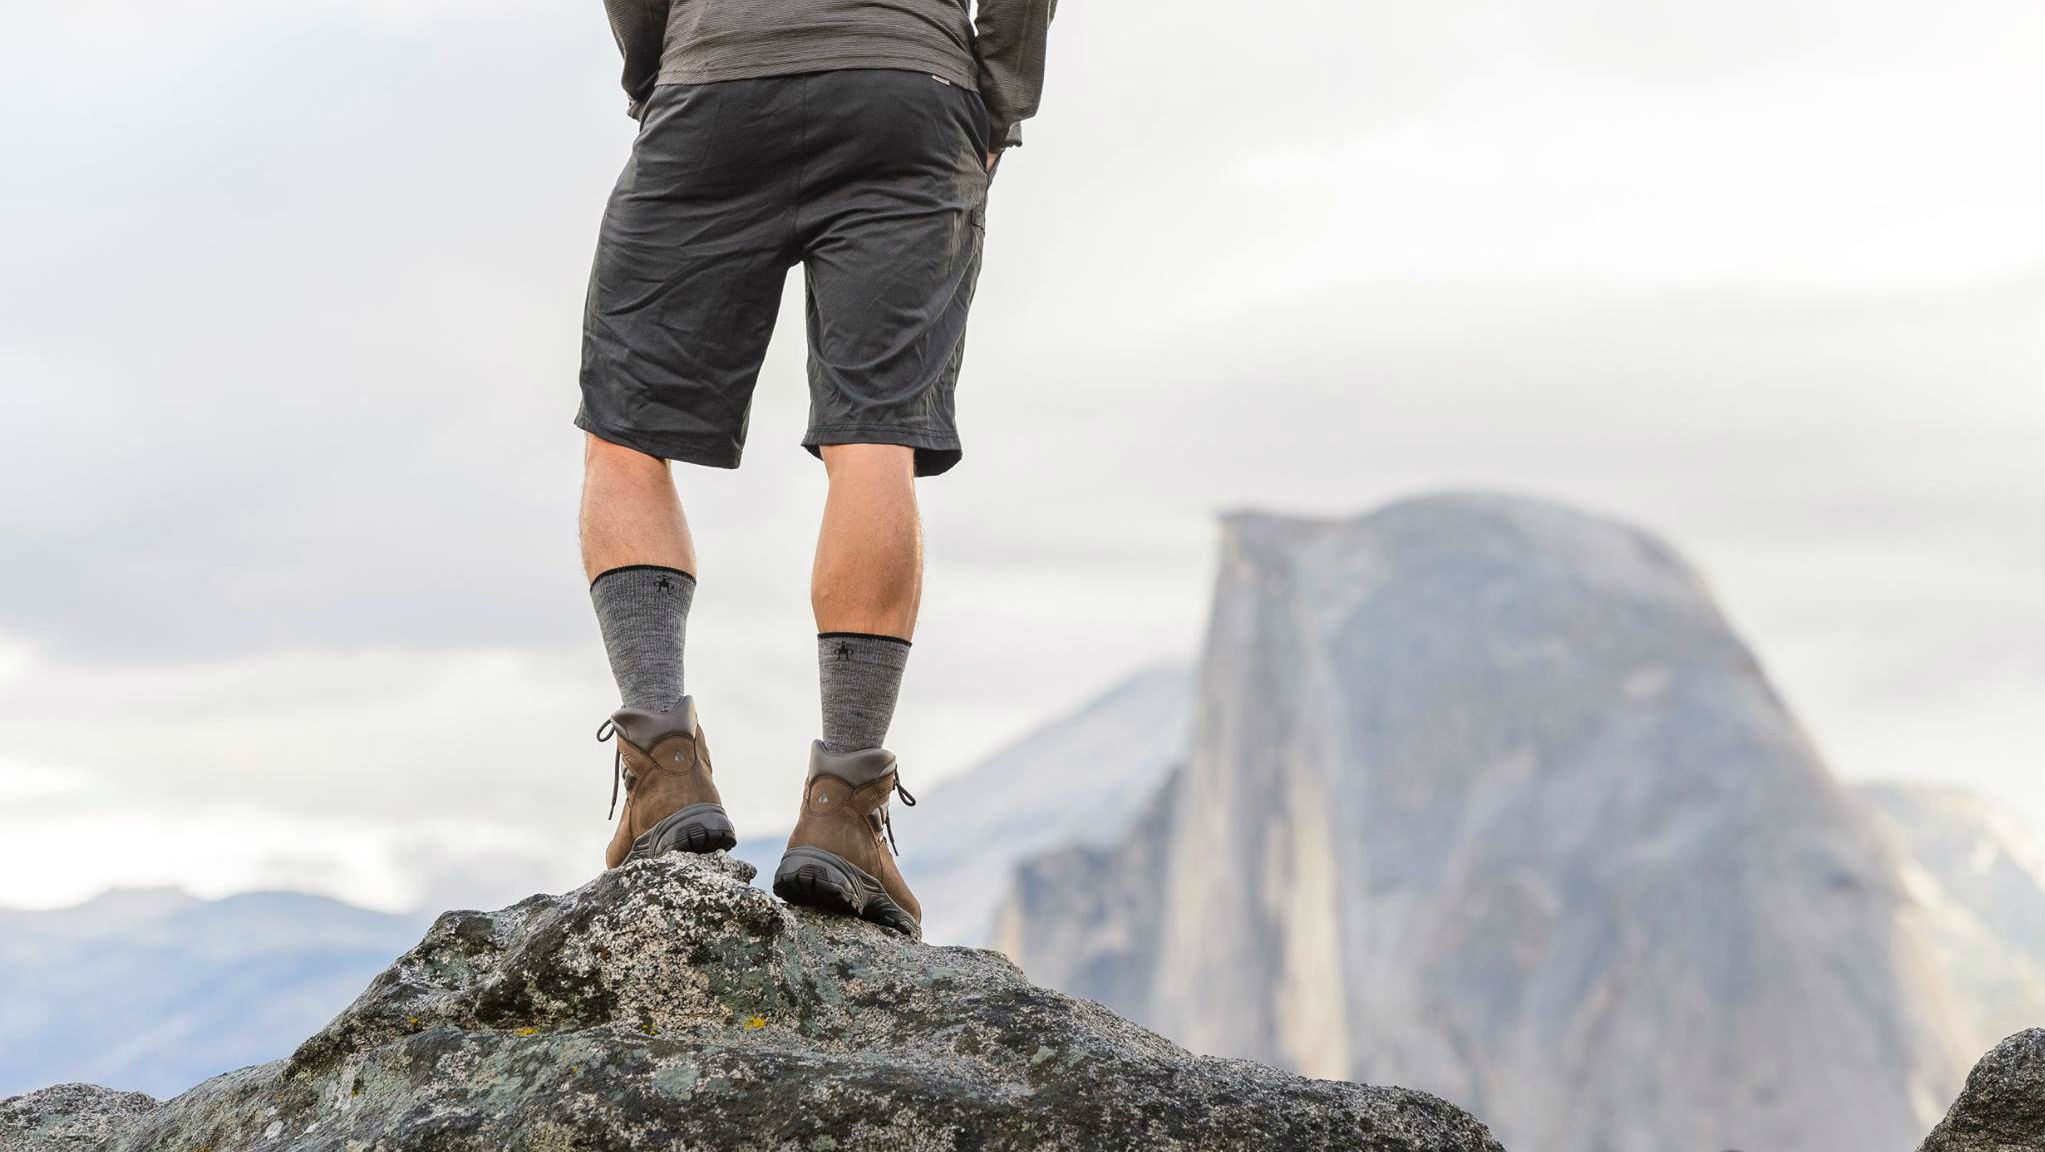 Our Favorite Travel Socks for Work and Trail - The Manual